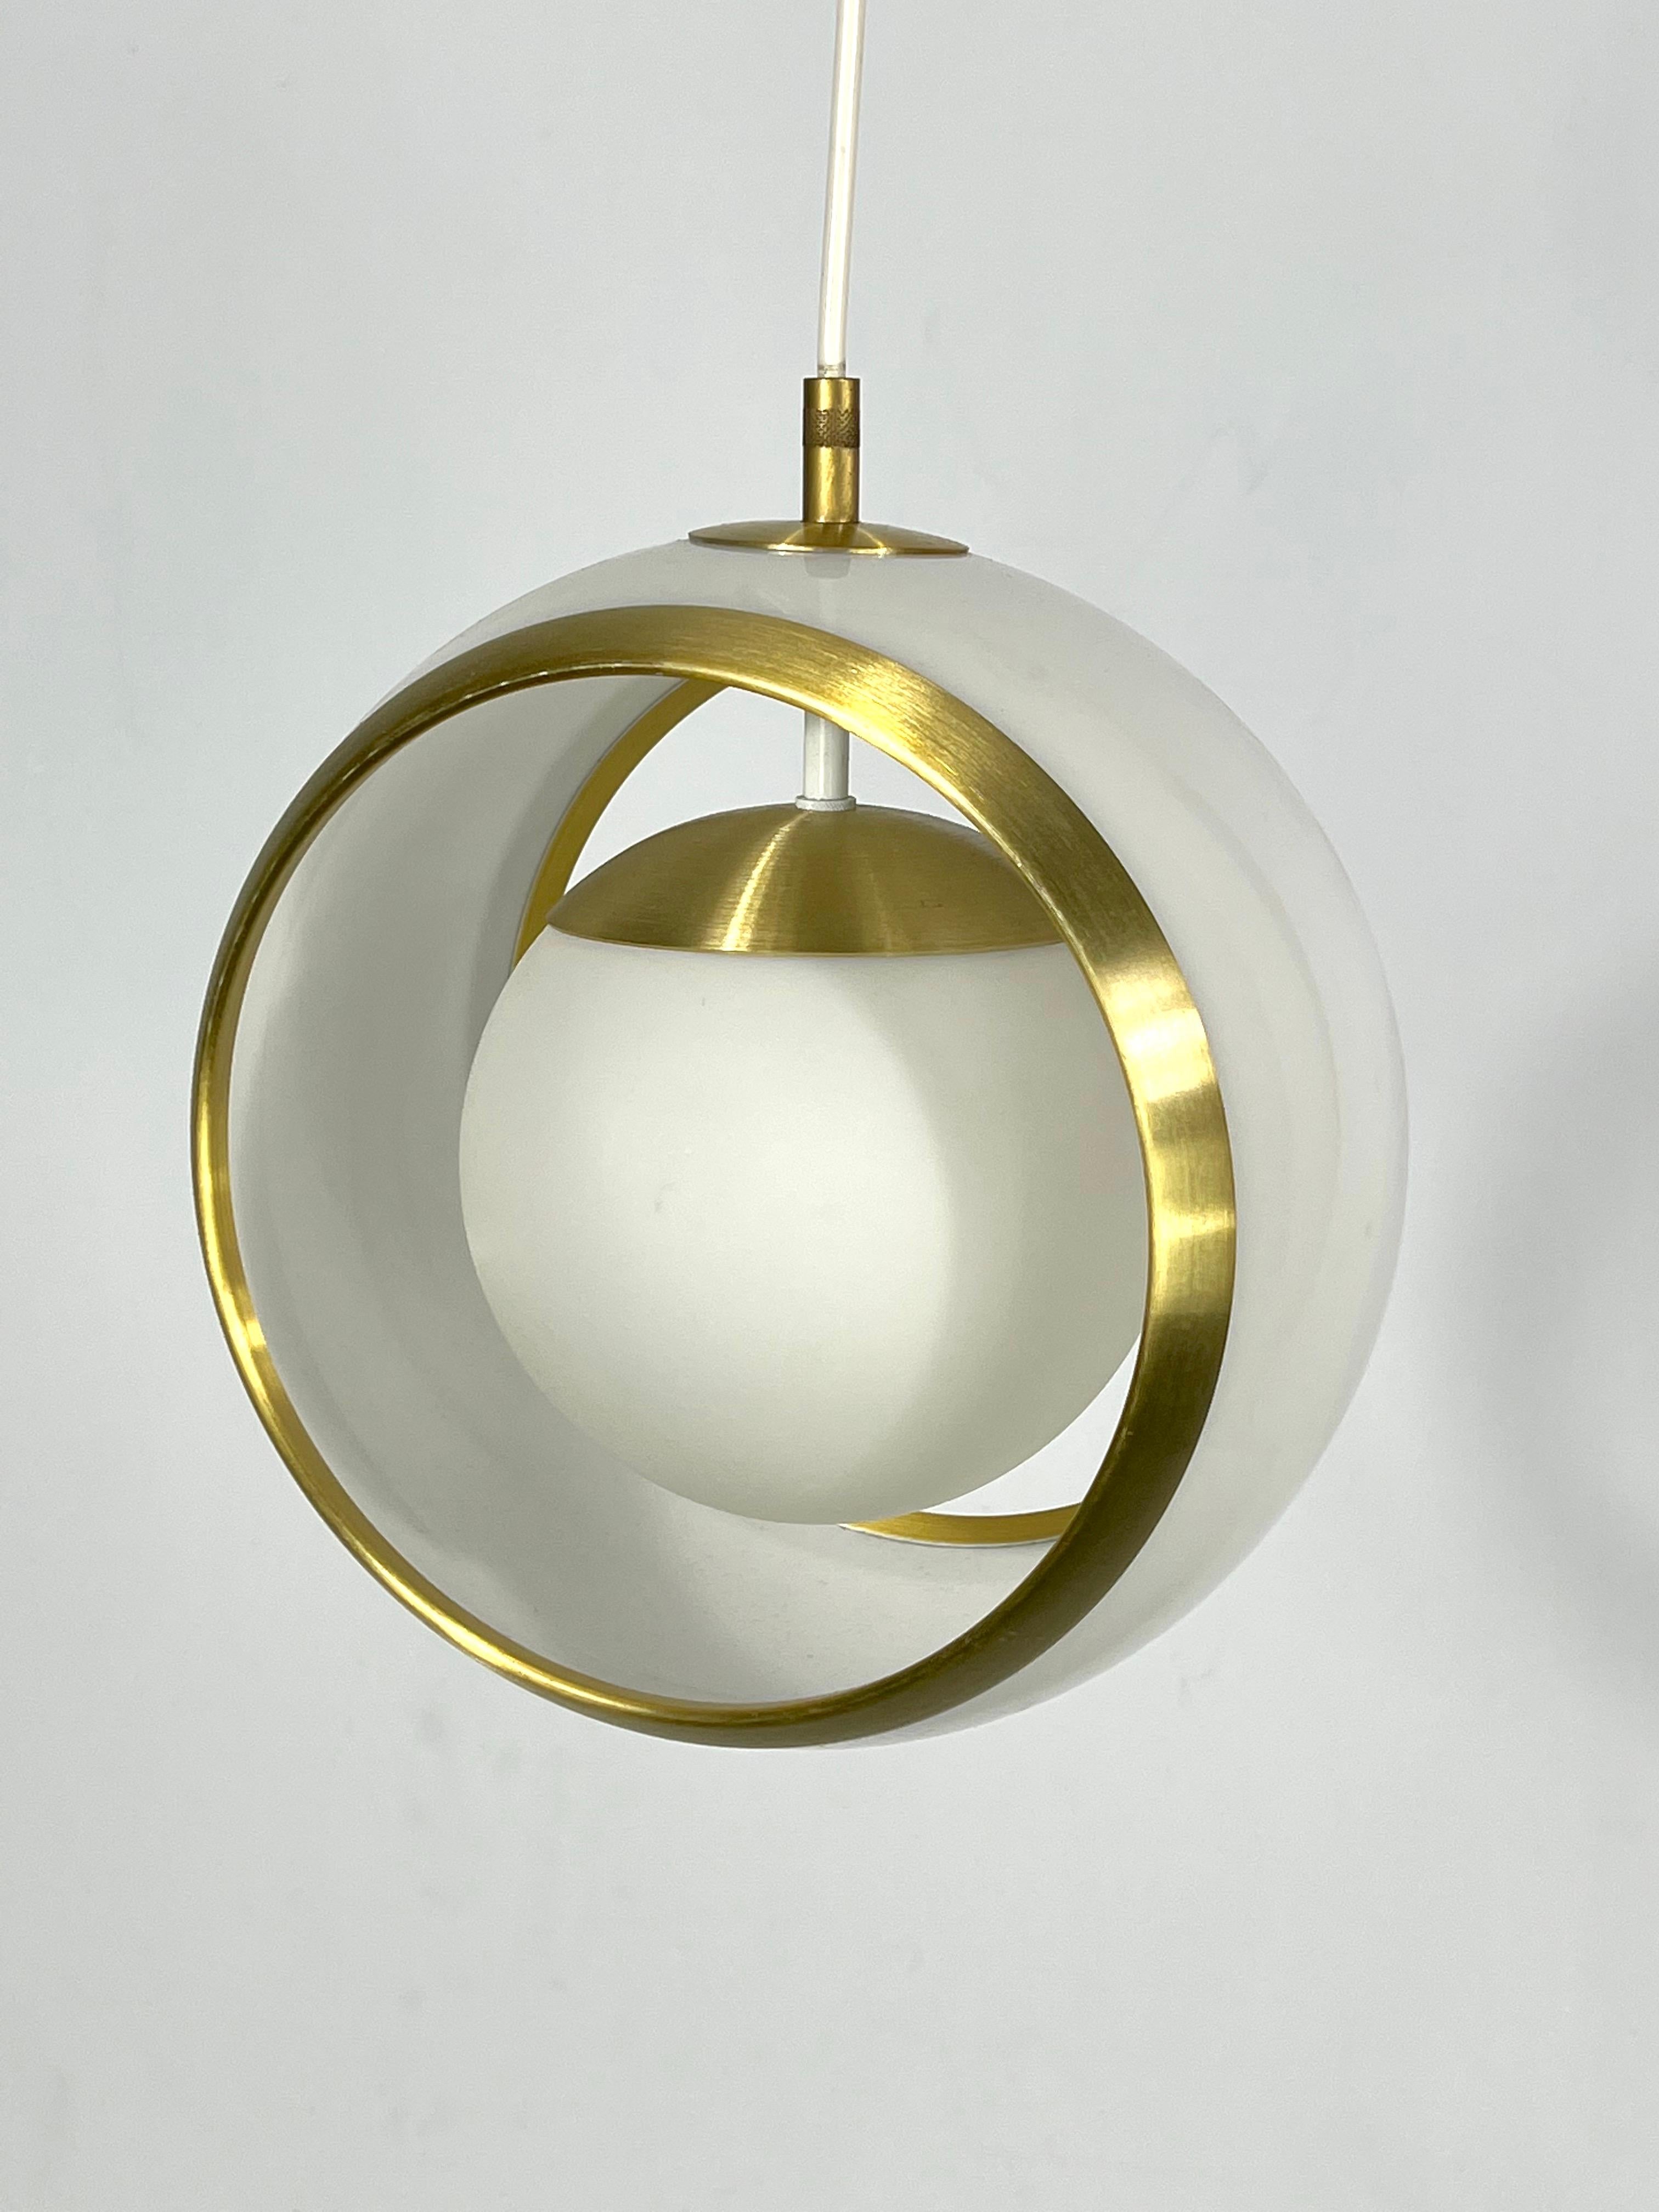 Stilux Milano, Gilded Aluminum, Opaline and Perspex Pendant, Italy, 1960s For Sale 1